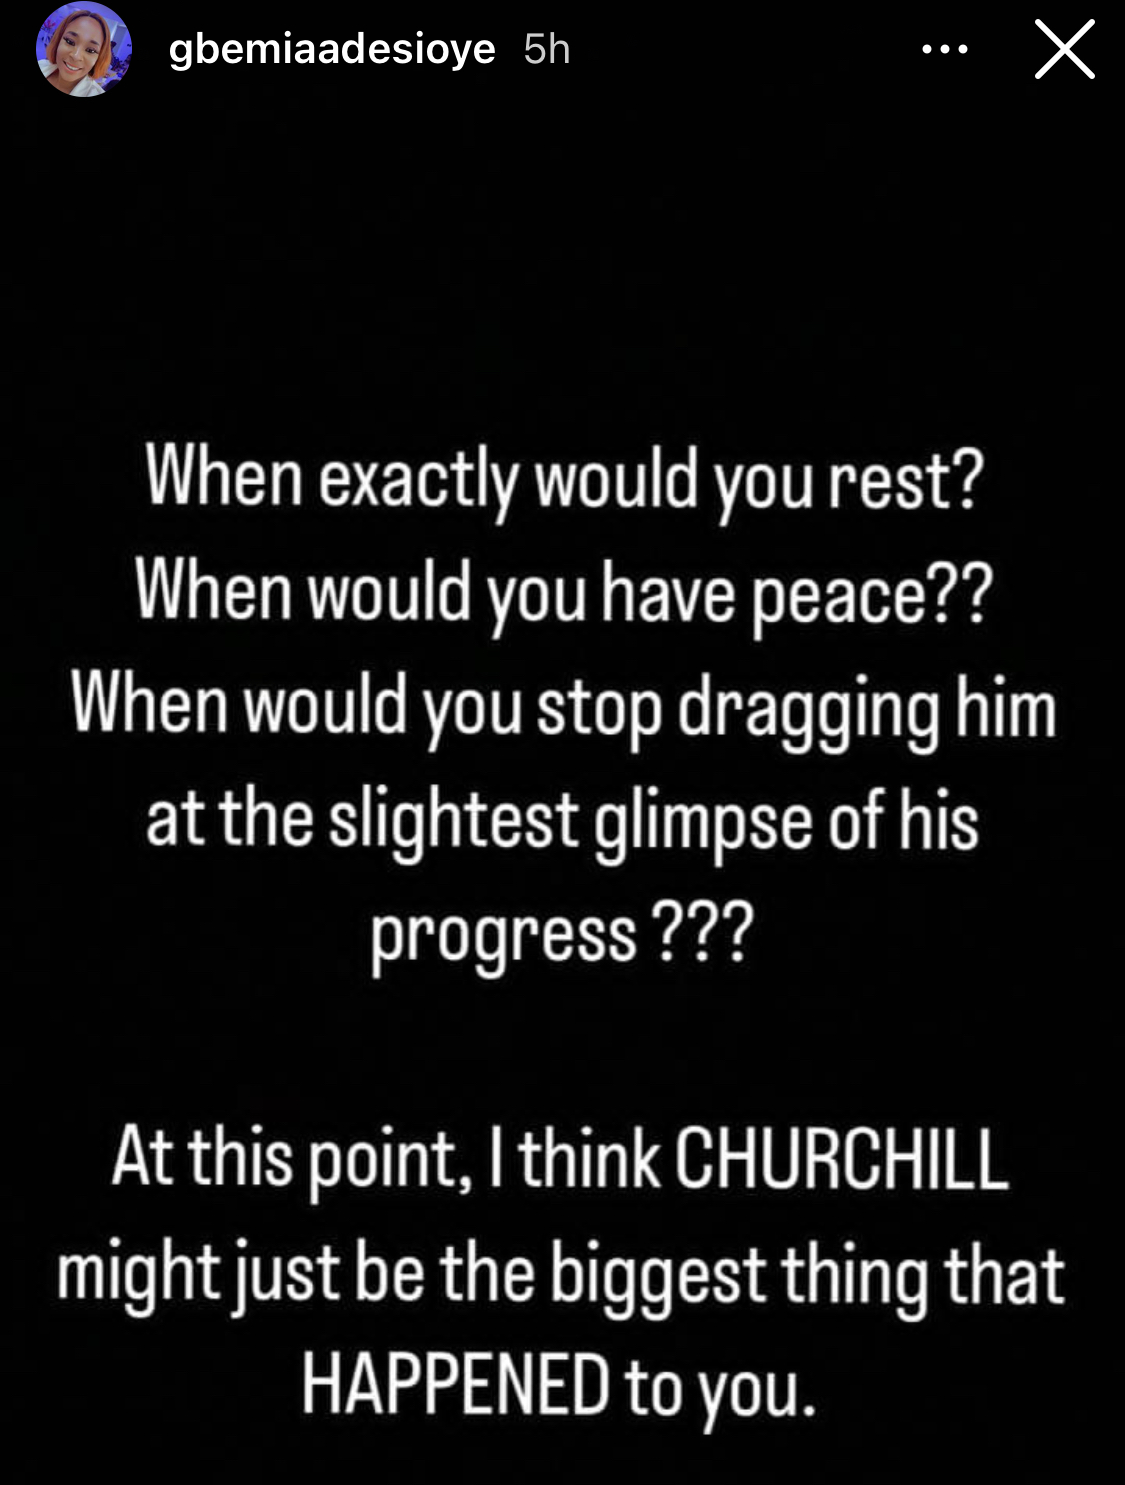 Tonto Dikeh is still angry with Churchill cause he bought N220M house for his mom - Cousin reveals